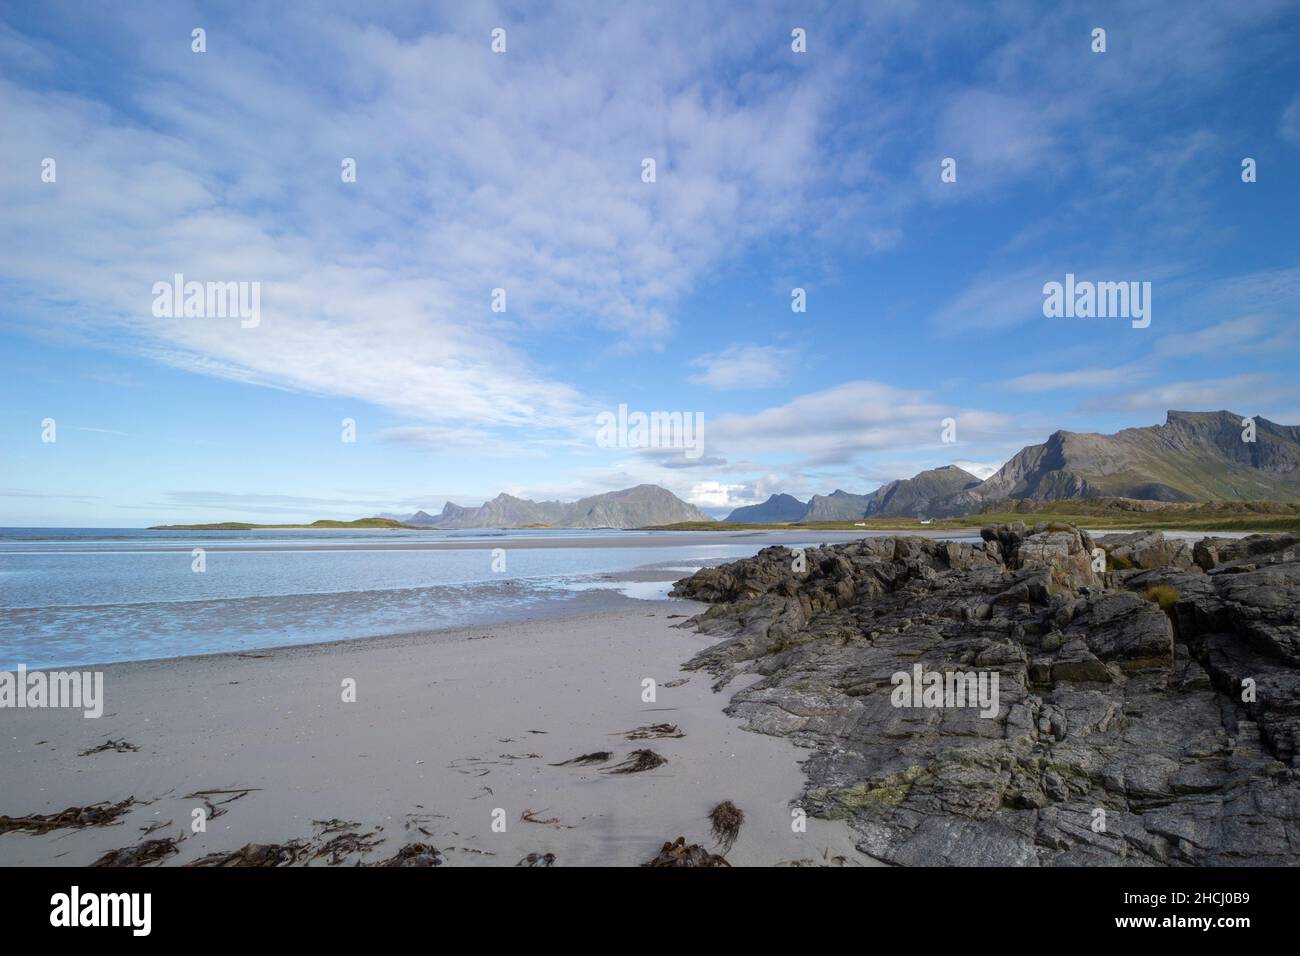 Yttersand Beach, located on the northern tip of Moskenesoy, Lofoten Islands, Norway Stock Photo